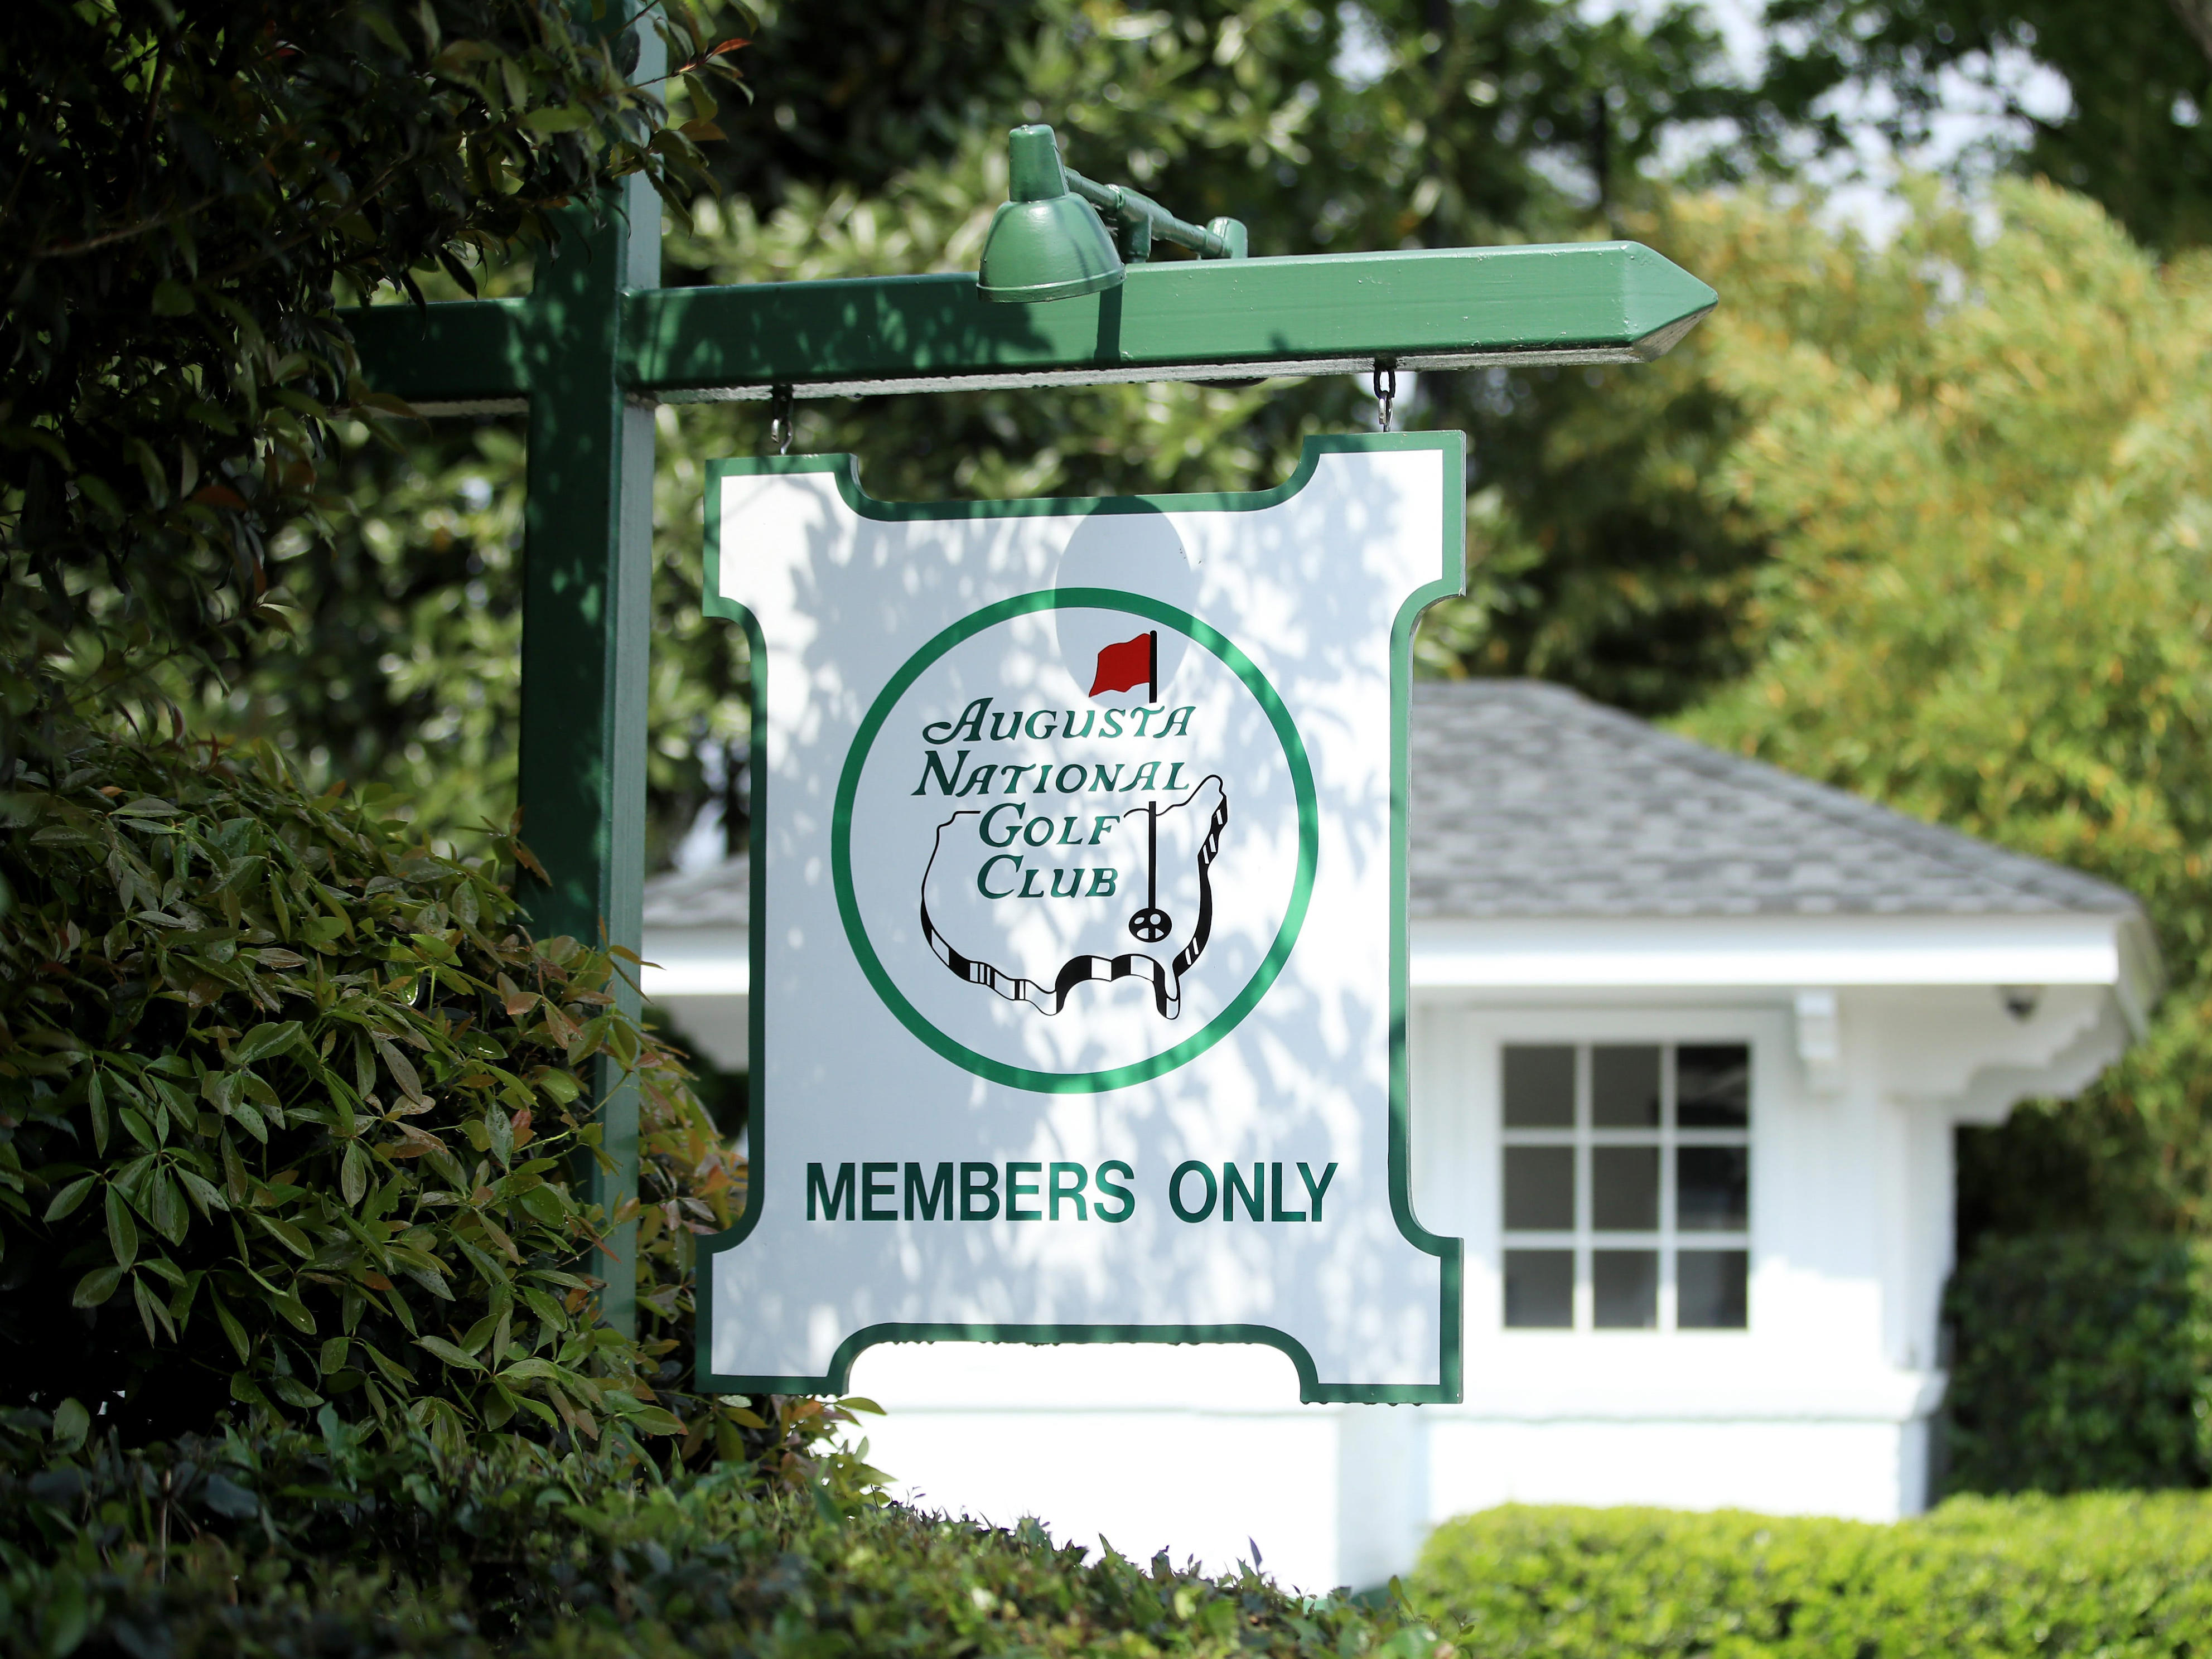 <ul class="summary-list"><li>The 2024 Masters Tournament is underway and concludes on Sunday.</li><li>The tournament is held at Augusta National, one of the most exclusive golf clubs in the world.</li><li>These clubs are known for years-long waitlists, expensive fees, and high-profile clientele.</li></ul><p>Take a look at almost any <a href="https://www.businessinsider.com/where-find-billionaire-events-places-parties-attended-the-worlds-richest-2023-11">billionaire's social calendar</a> this week and you're likely to see one thing: <a href="https://www.businessinsider.com/masters-billionaires-favorite-golf-tournament-kicks-off-augusta-national-2024-4">The Masters</a>.</p><p>The prestigious golf tournament, which is the first major event on the PGA Tour, is held in Augusta, Georgia, at the <a href="https://www.businessinsider.com/masters-golf-tournament-augusta-best-photos-2019-4">Augusta National Golf Club</a>. There, the best golfers in the world compete to win the <a href="https://www.businessinsider.com/masters-green-jacket-rules-jon-rahm-tiger-woods">coveted green jacket</a> bestowed only to tournament winners and club members and to etch their name into a rich sports history.</p><p>With <a href="https://www.businessinsider.com/masters-augusta-airport-private-jets-delta-american-airlines-2024-04">past Masters attendees</a> ranging from Nike cofounder Phil Knight to Microsoft cofounder Bill Gates, the event is an annual reminder of the wealth ingrained in golf's history and the culture of exclusivity it breeds in the most elite clubs.</p><p>"There's a huge amount of very exclusive clubs all over the world. I would say that Augusta National is the most famous one," Barnabas Carrega, CEO of luxury travel and planning firm GR8 Experience, told Business Insider.</p><p>"I think that there's two different ways to look at why a club is exclusive and one of them is the quality of the golf course. Sometimes, the golf course has so much history behind it that the club becomes extremely exclusive by default because of the importance of the golf course," said Carrega.</p><p>"And then other times it's just the place, the service, the level of facilities, and what they've built around the golf experience," he added.</p><p>Regardless of how they achieved their exclusivity, such clubs are almost impossible to join. They require special connections, patience, and plenty of money for a <em>chance</em> at acceptance.</p><p>So, in case you never have the opportunity to befriend Tiger Woods or win the lottery, here's a peek at 10 of the most exclusive golf clubs in the world.</p><div class="read-original">Read the original article on <a href="https://www.businessinsider.com/most-exclusive-golf-clubs-in-the-world-photos">Business Insider</a></div>